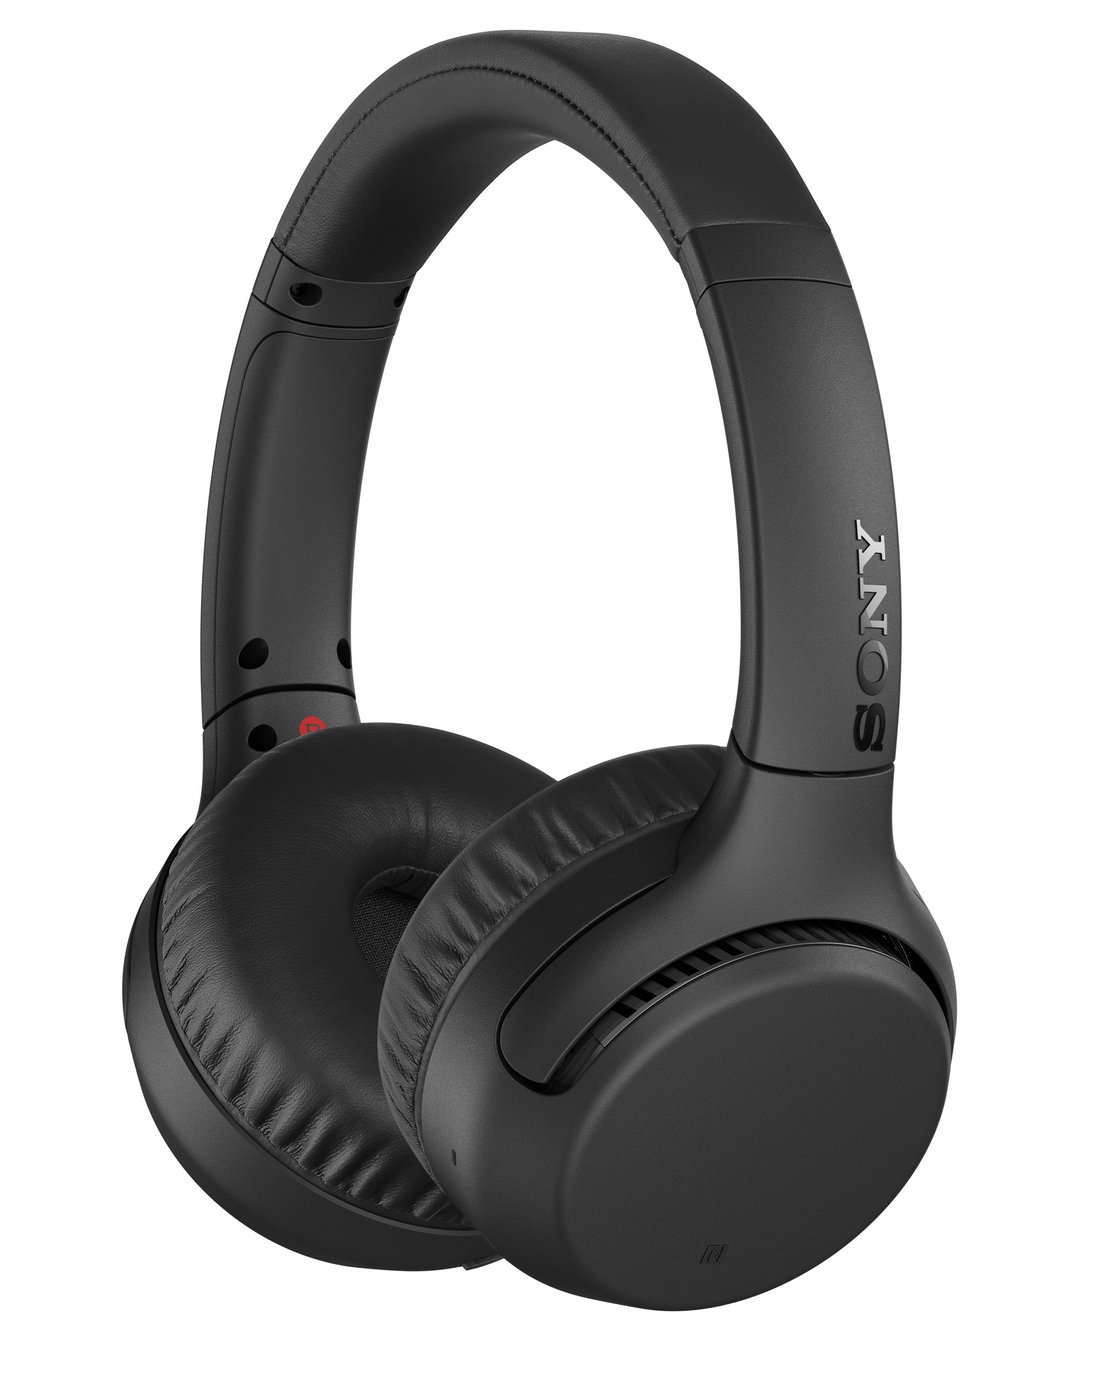 Sony WH-XB700 Over-Ear Wireless Headphones Review